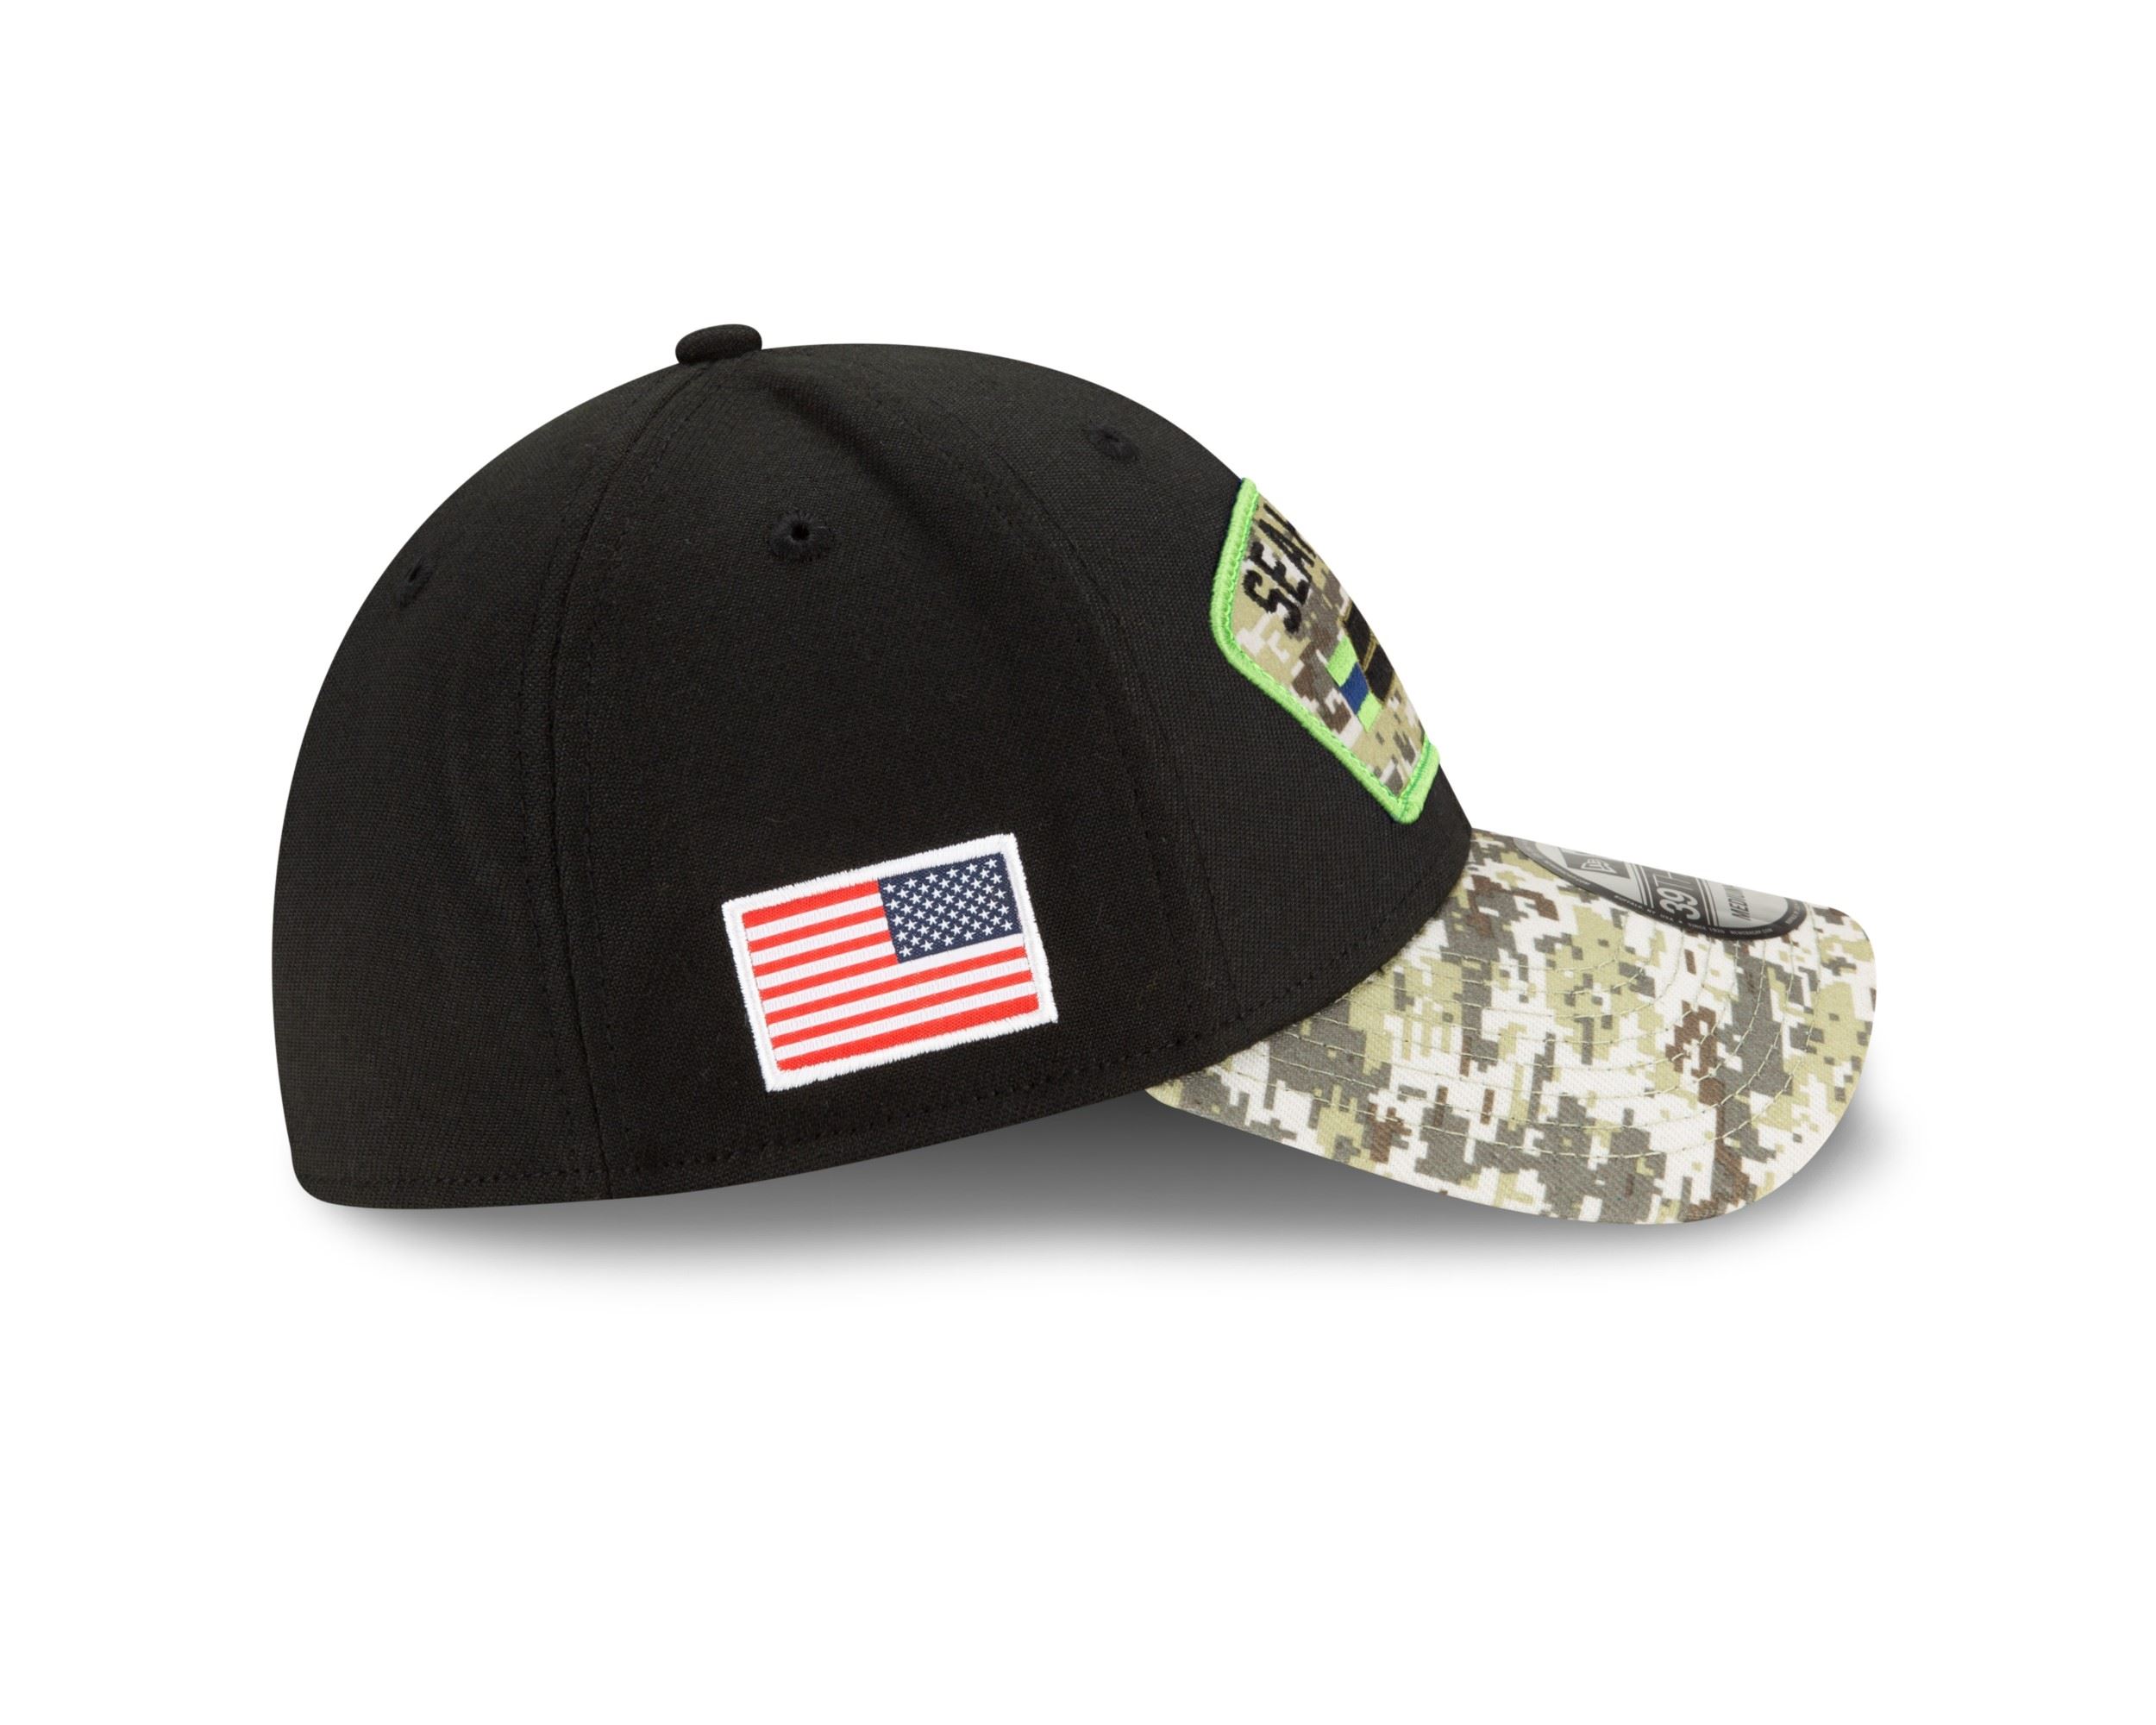 Seattle Seahawks NFL On Field 2021 Salute to Service Black 39Thirty Stretch Cap New Era